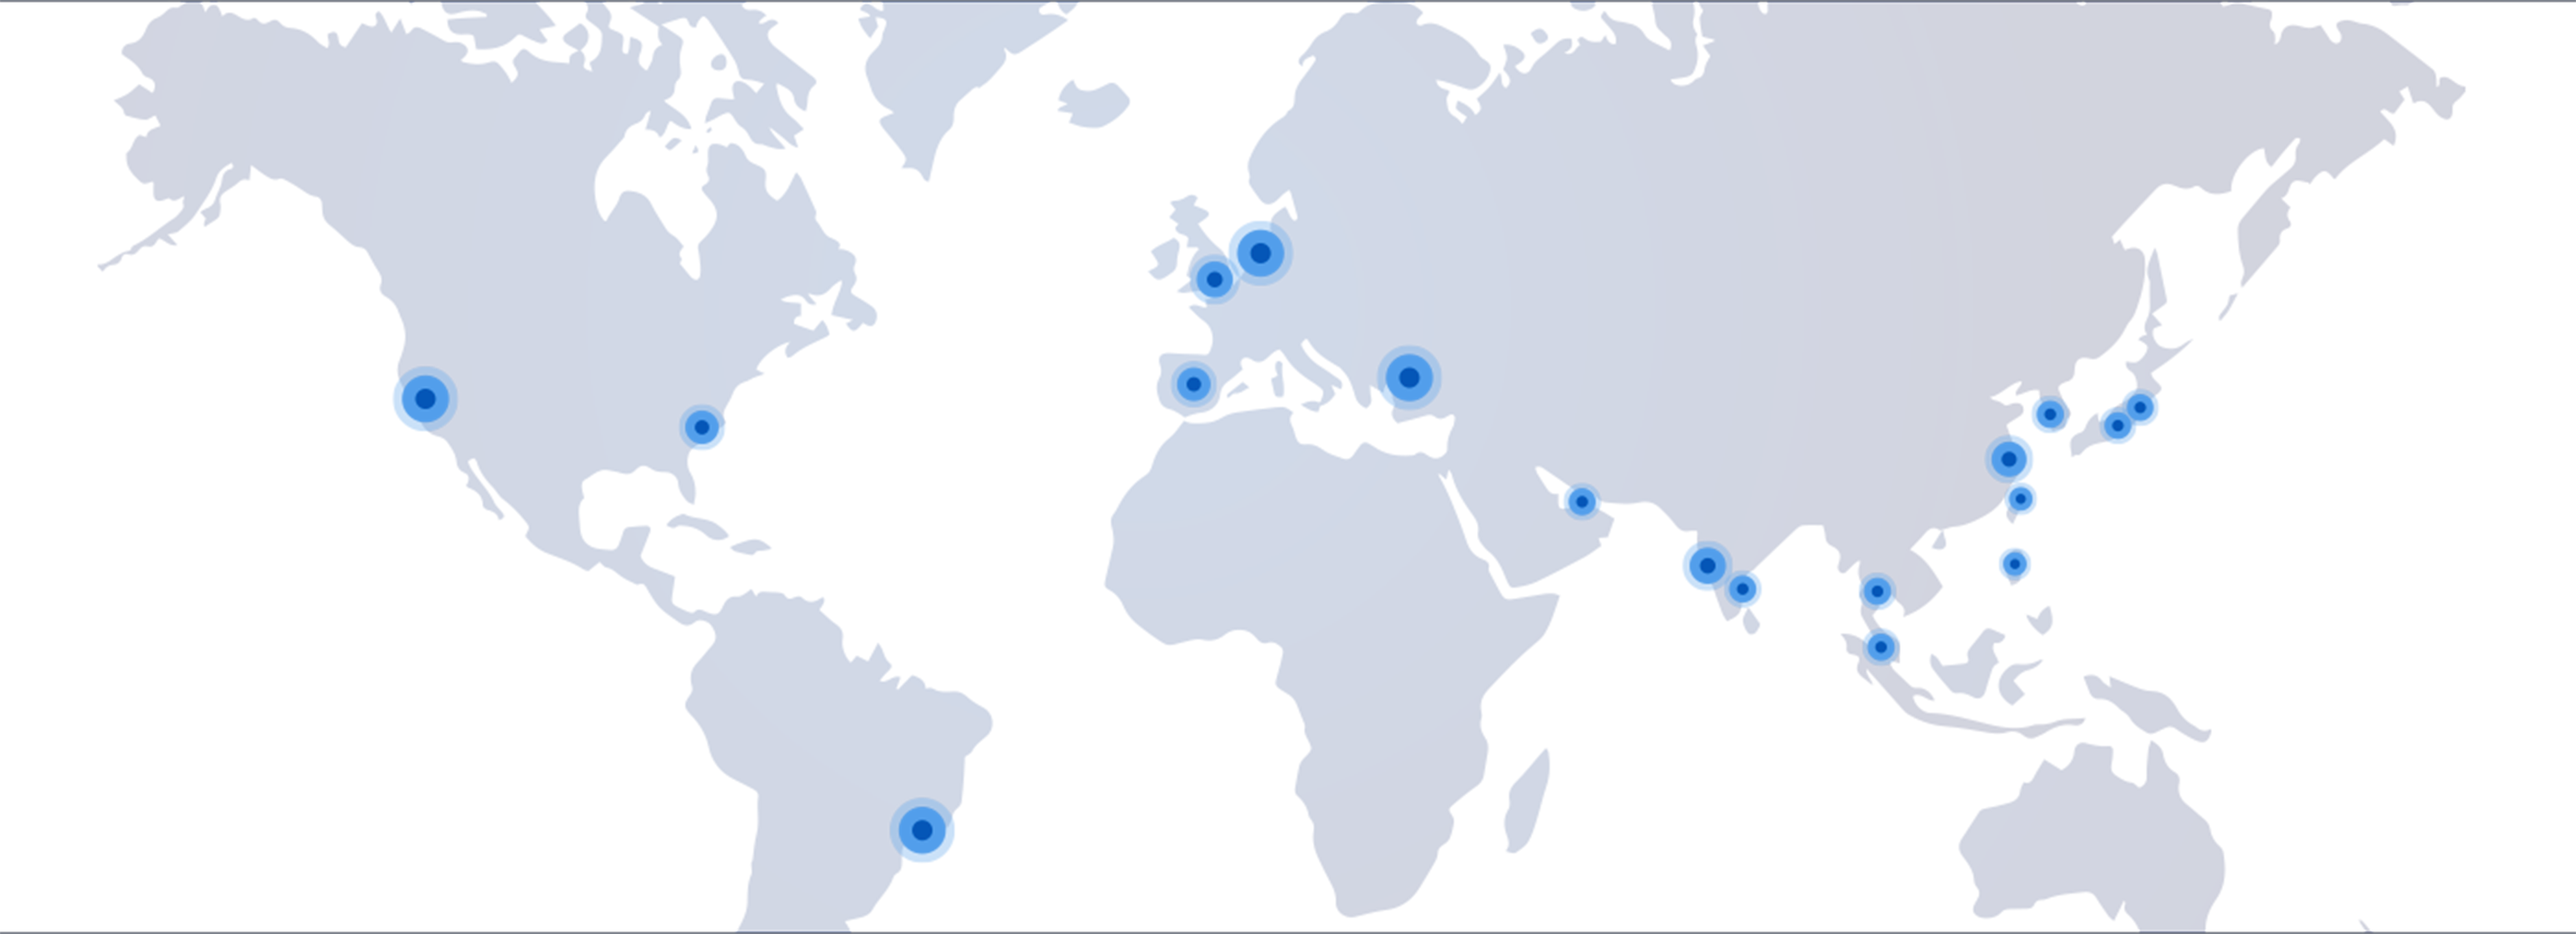 A10 Networks Global Office Locations